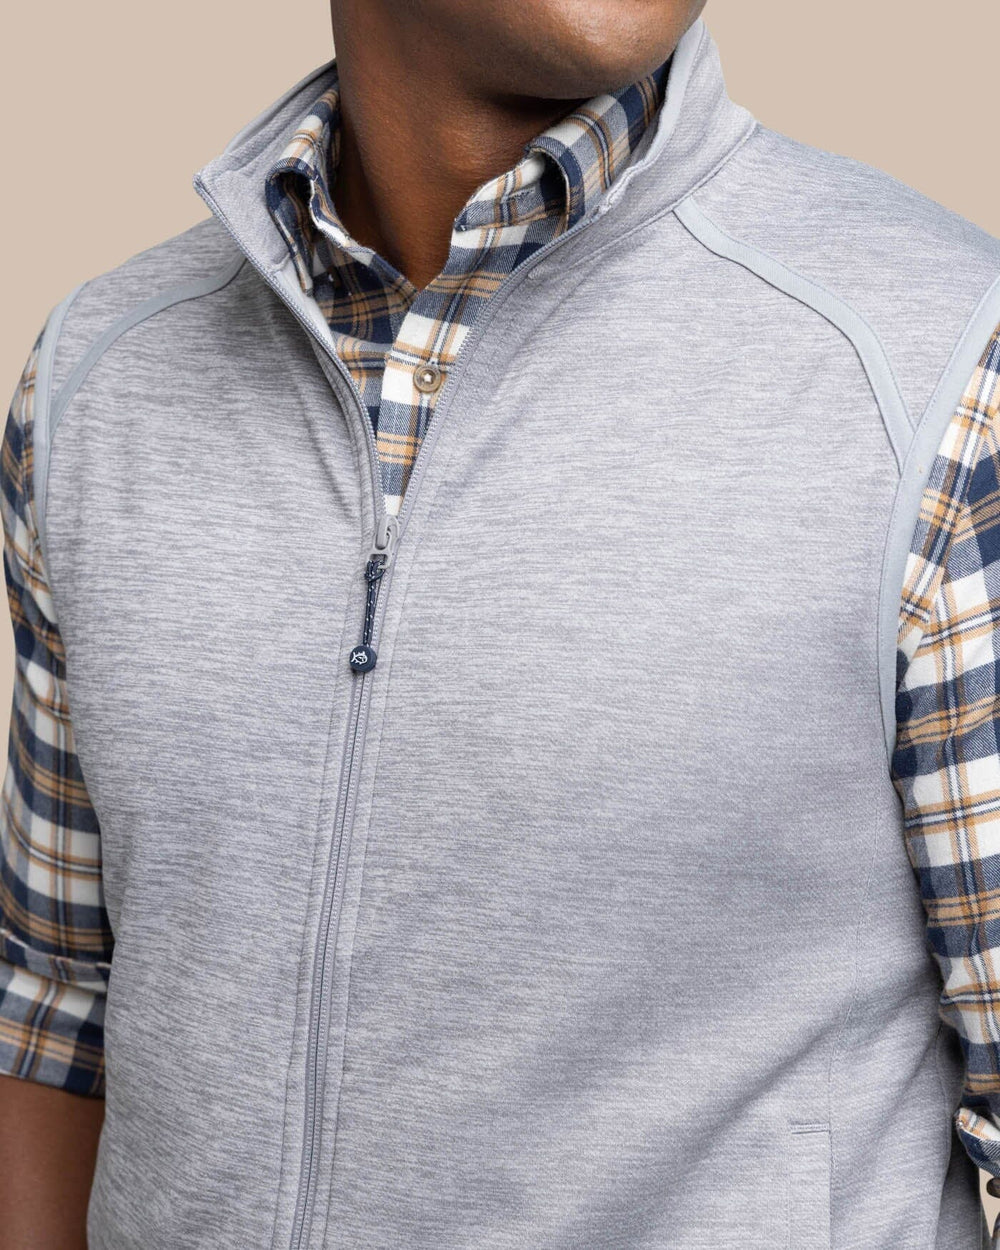 The detail view of the Southern Tide Baybrook Heather Vest by Southern Tide - Heather Ultimate Grey